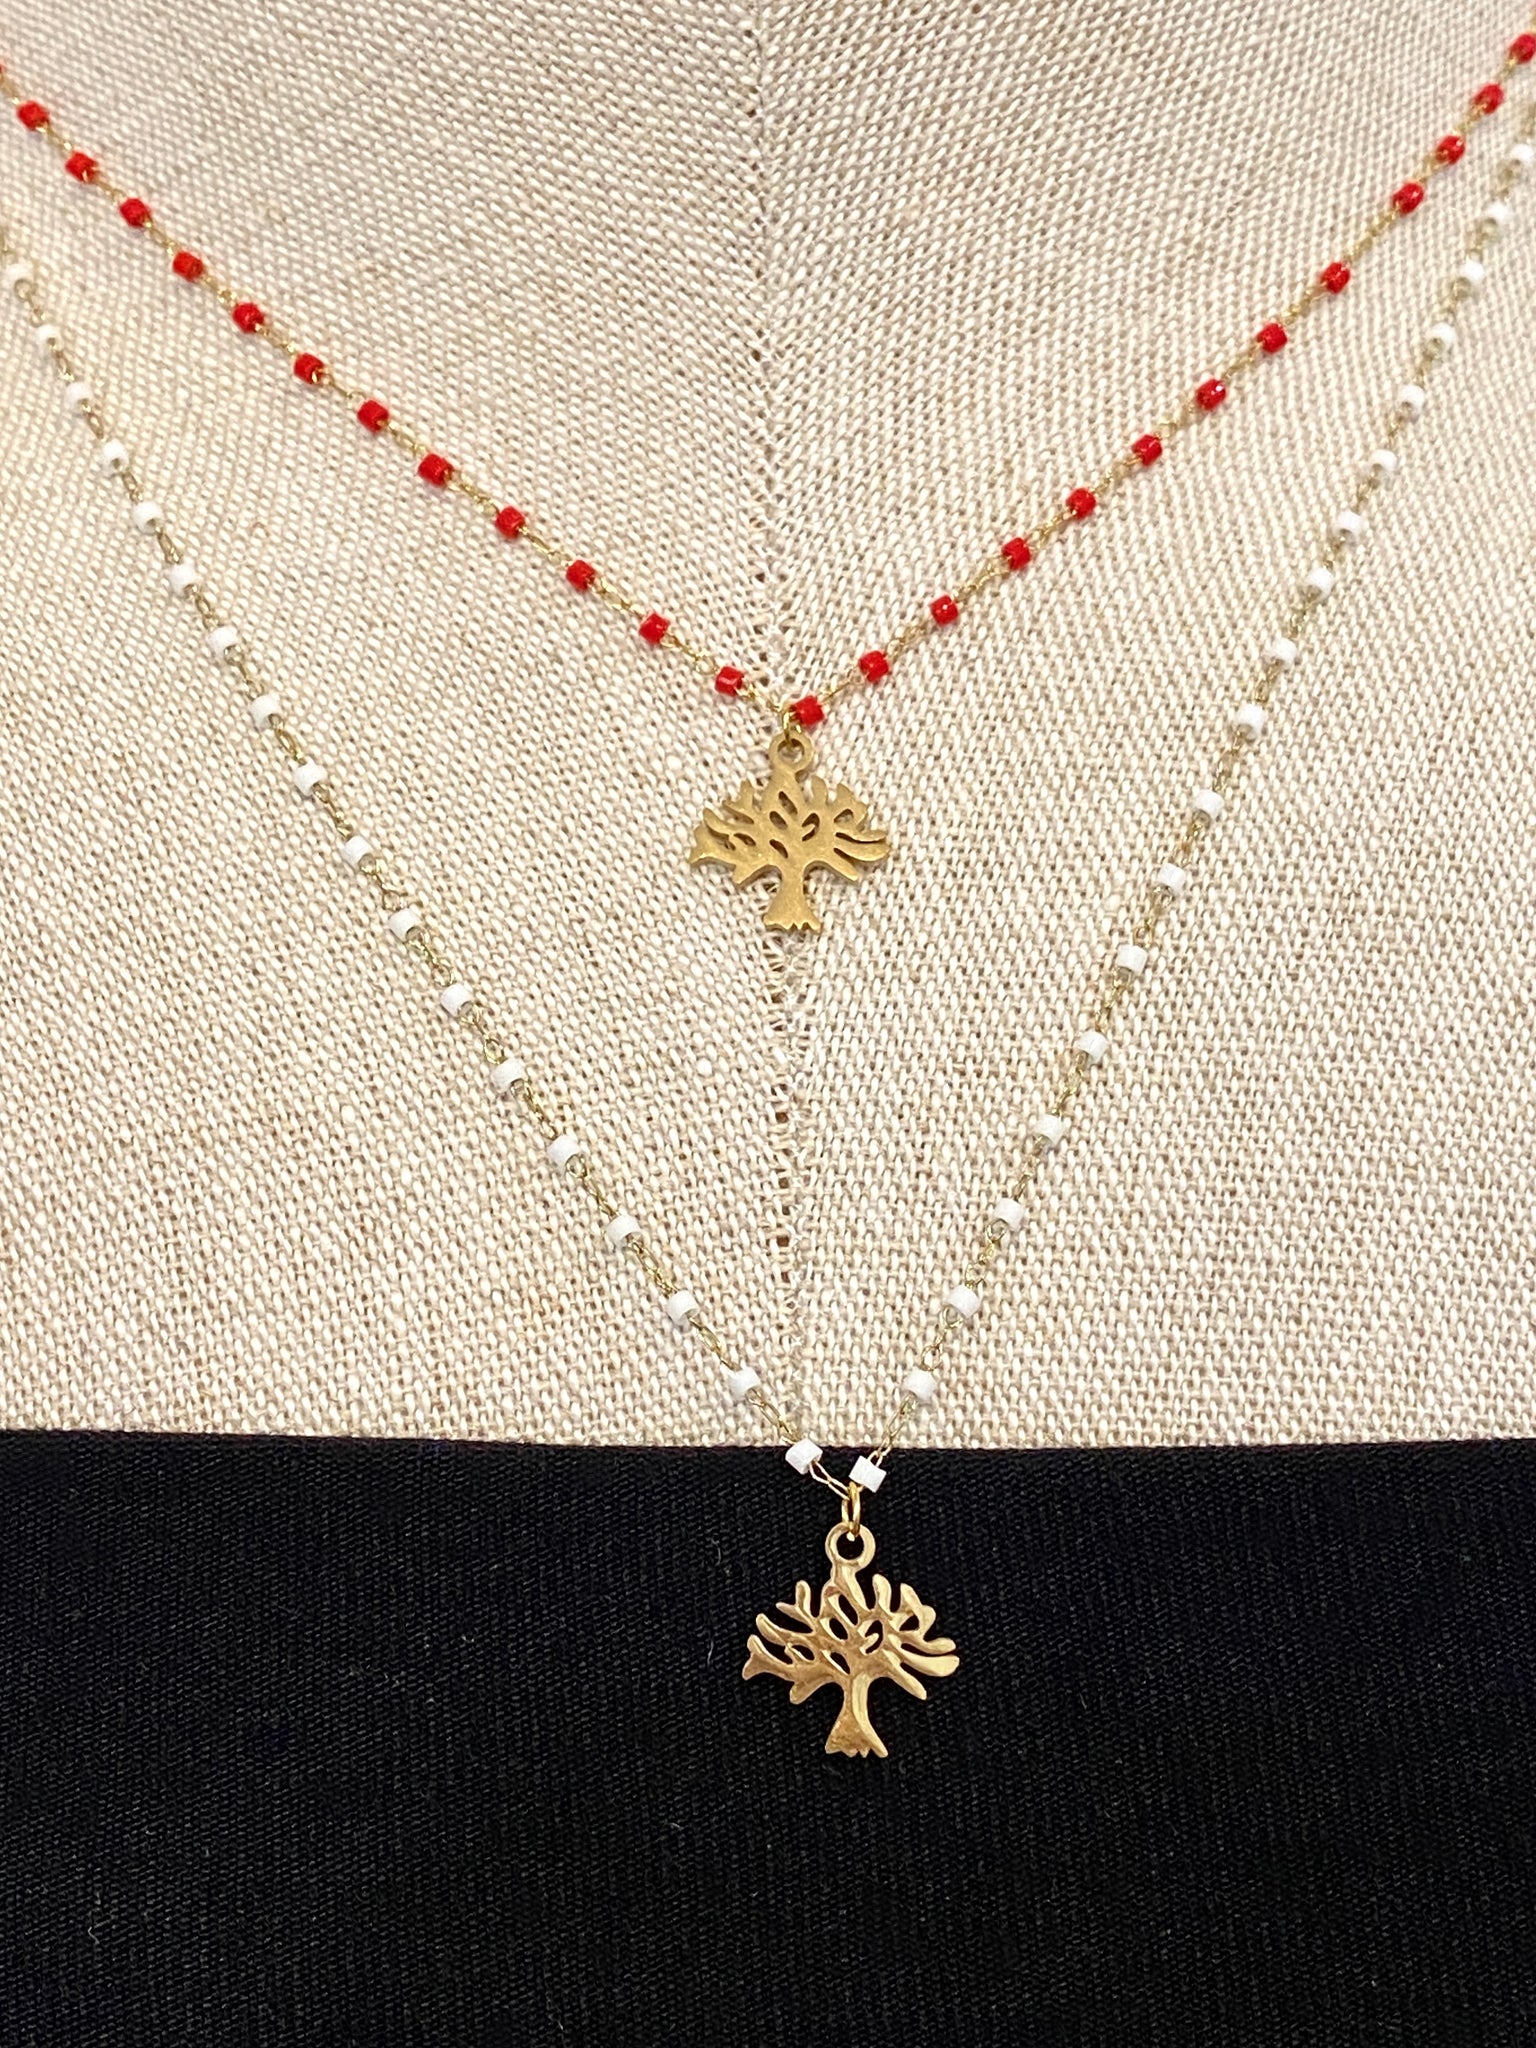 Gold Tree of Life Charm Necklace